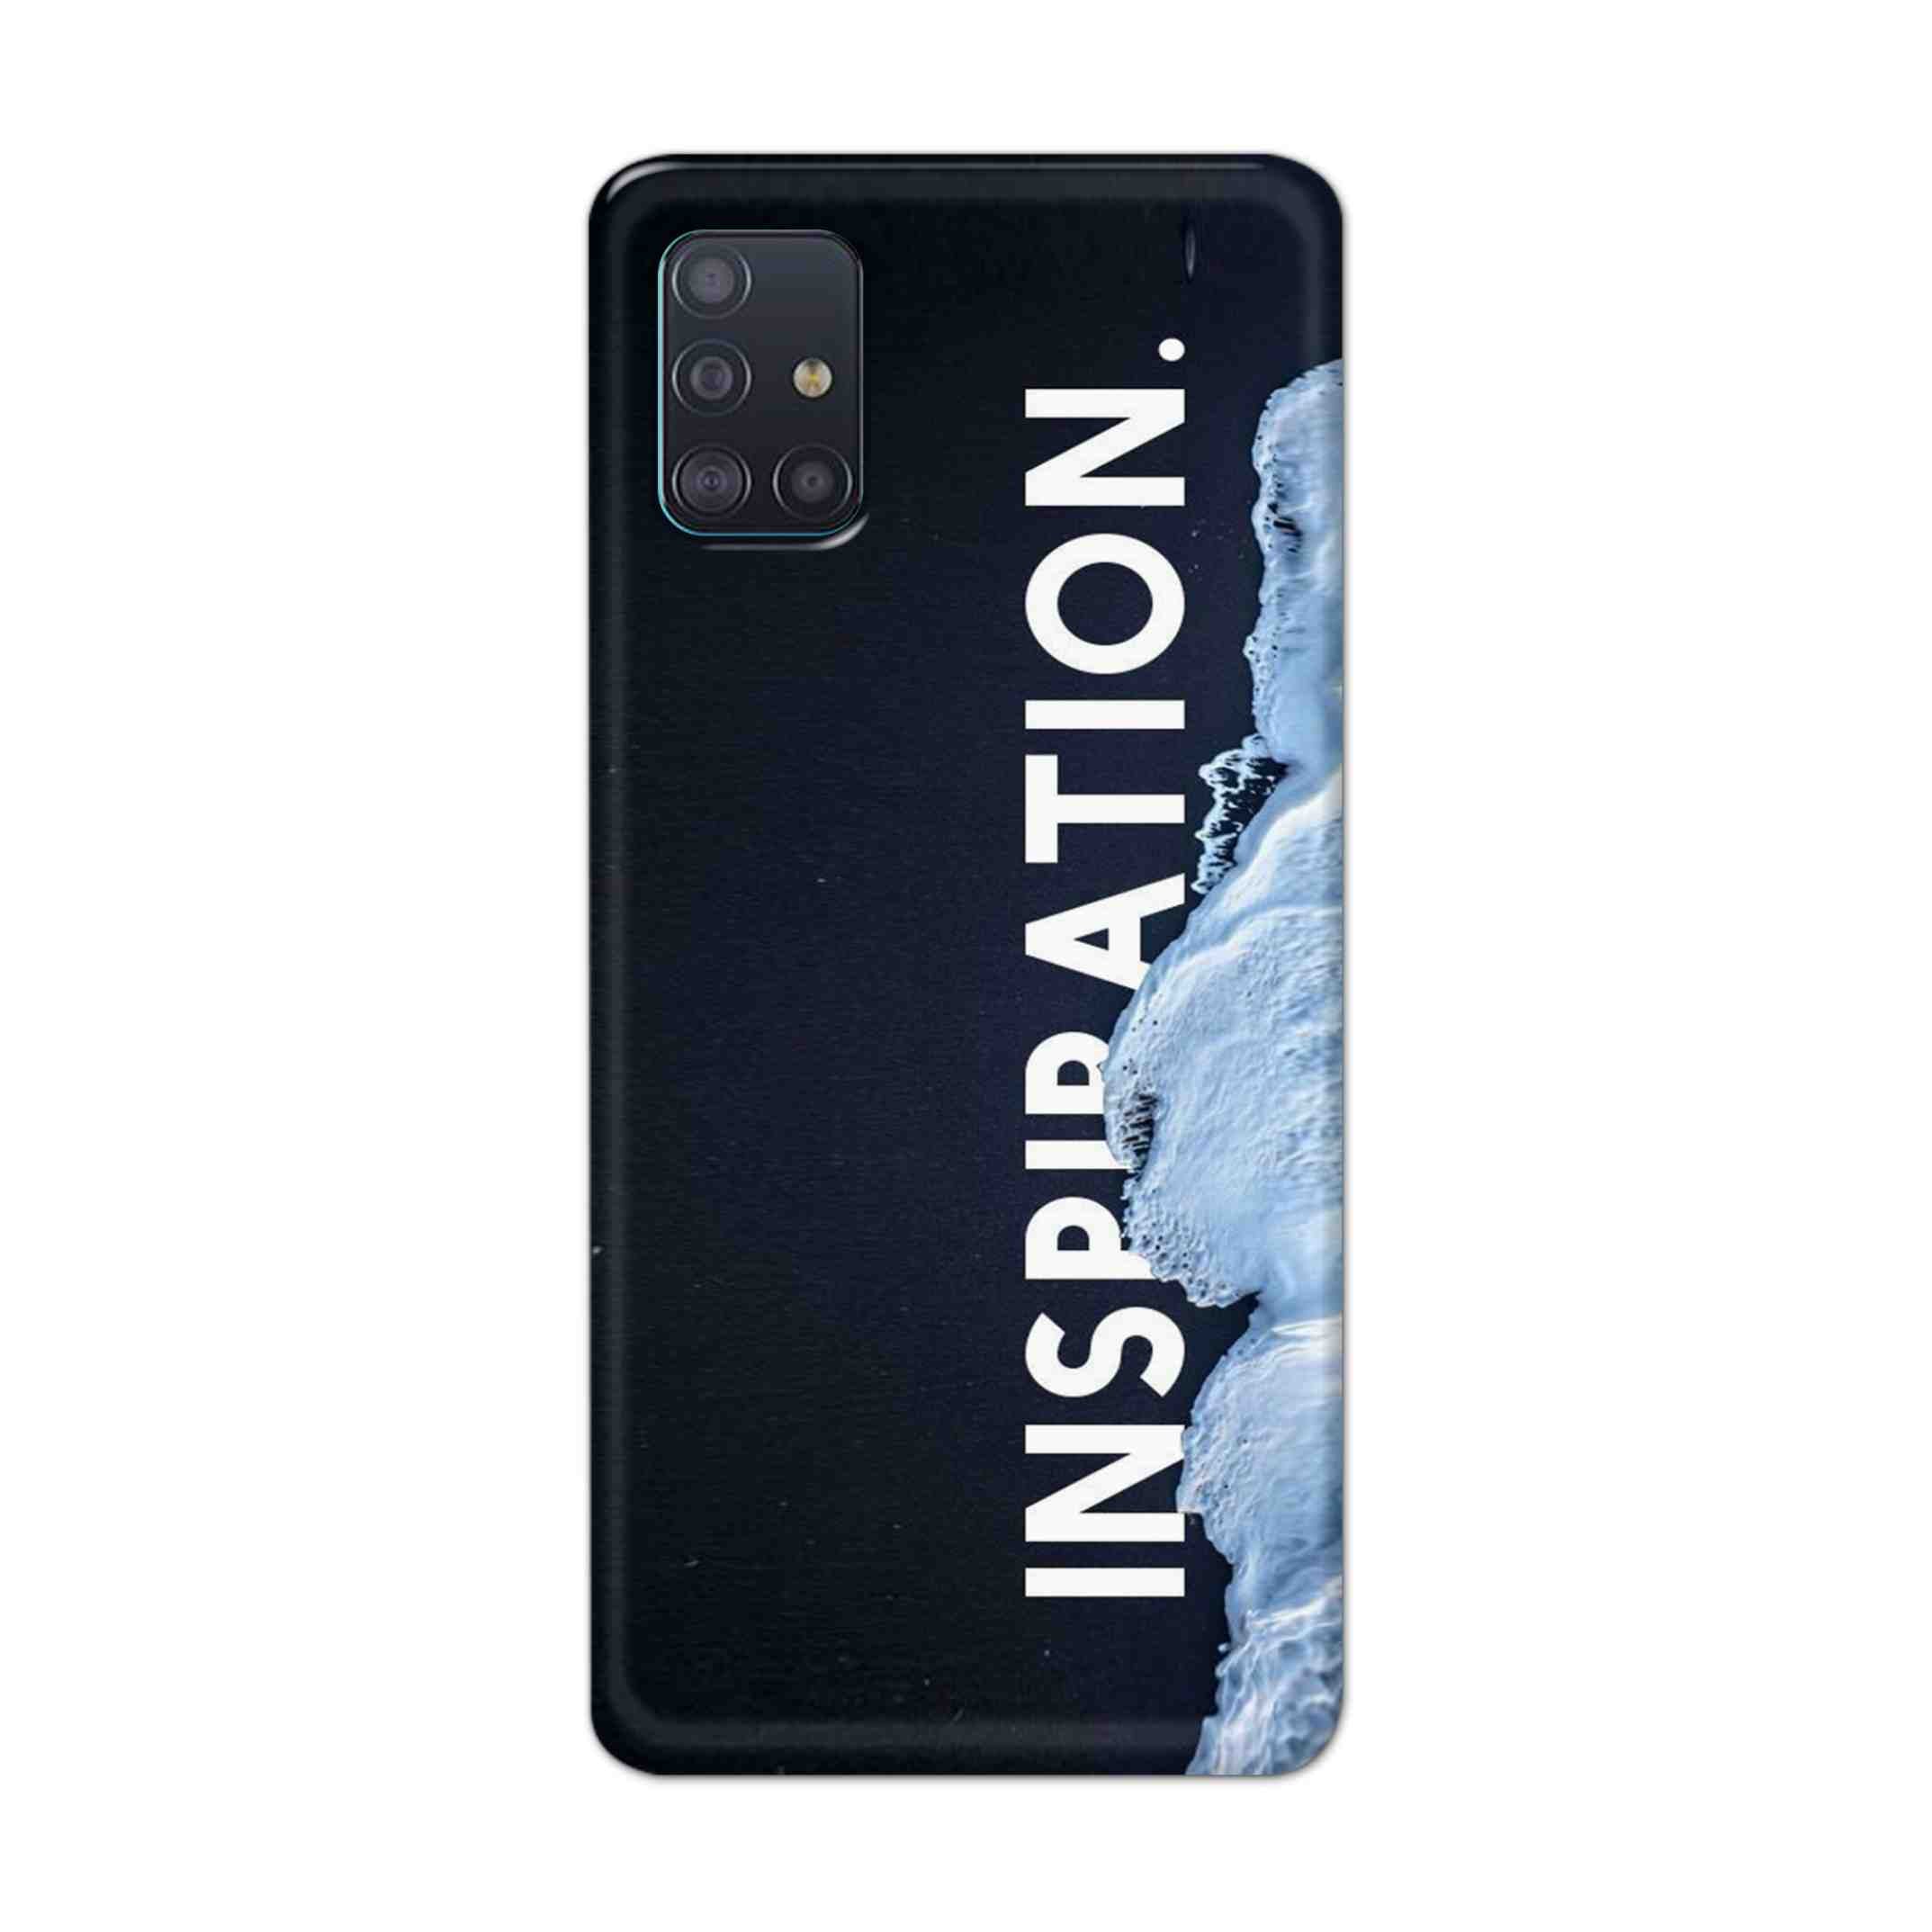 Buy Inspiration Hard Back Mobile Phone Case Cover For Samsung Galaxy A71 Online